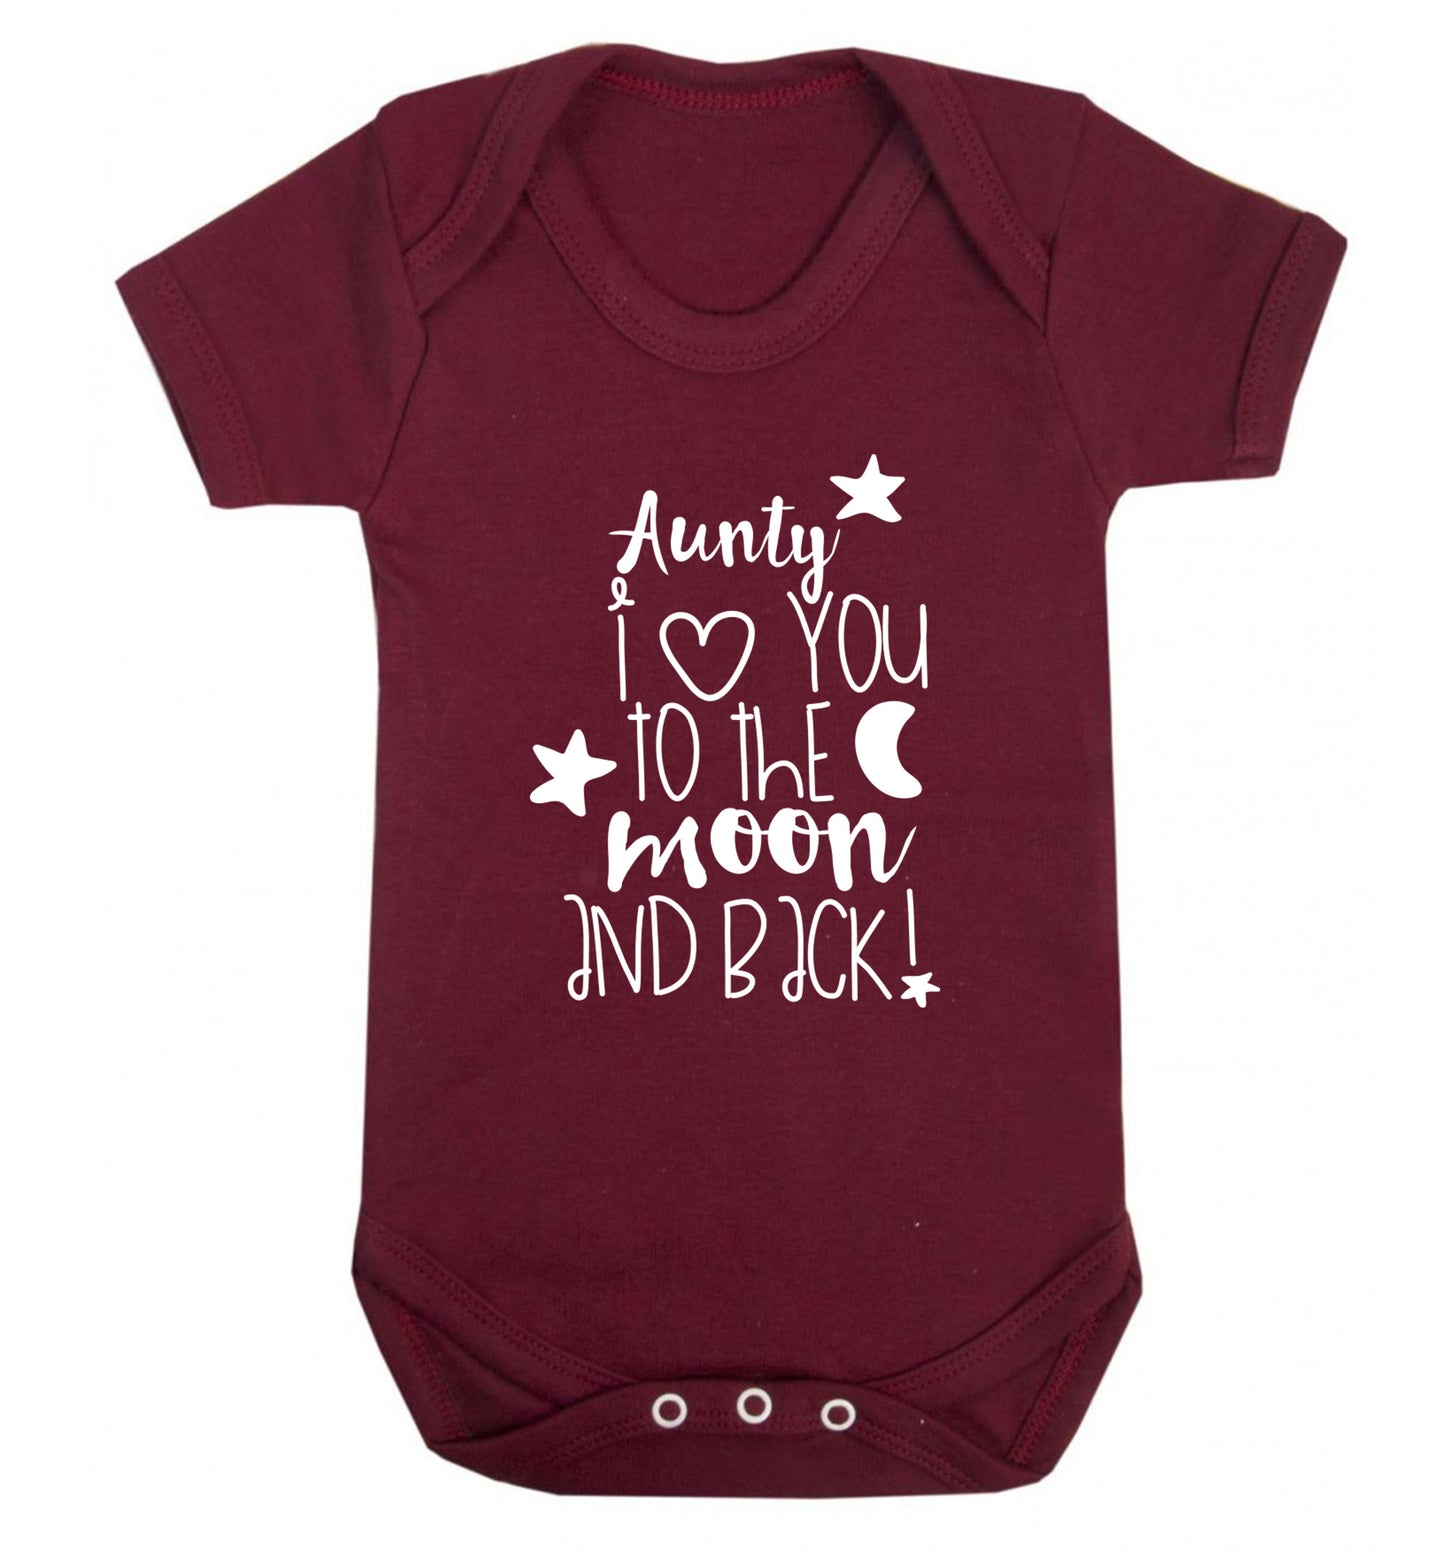 Aunty I love you to the moon and back Baby Vest maroon 18-24 months